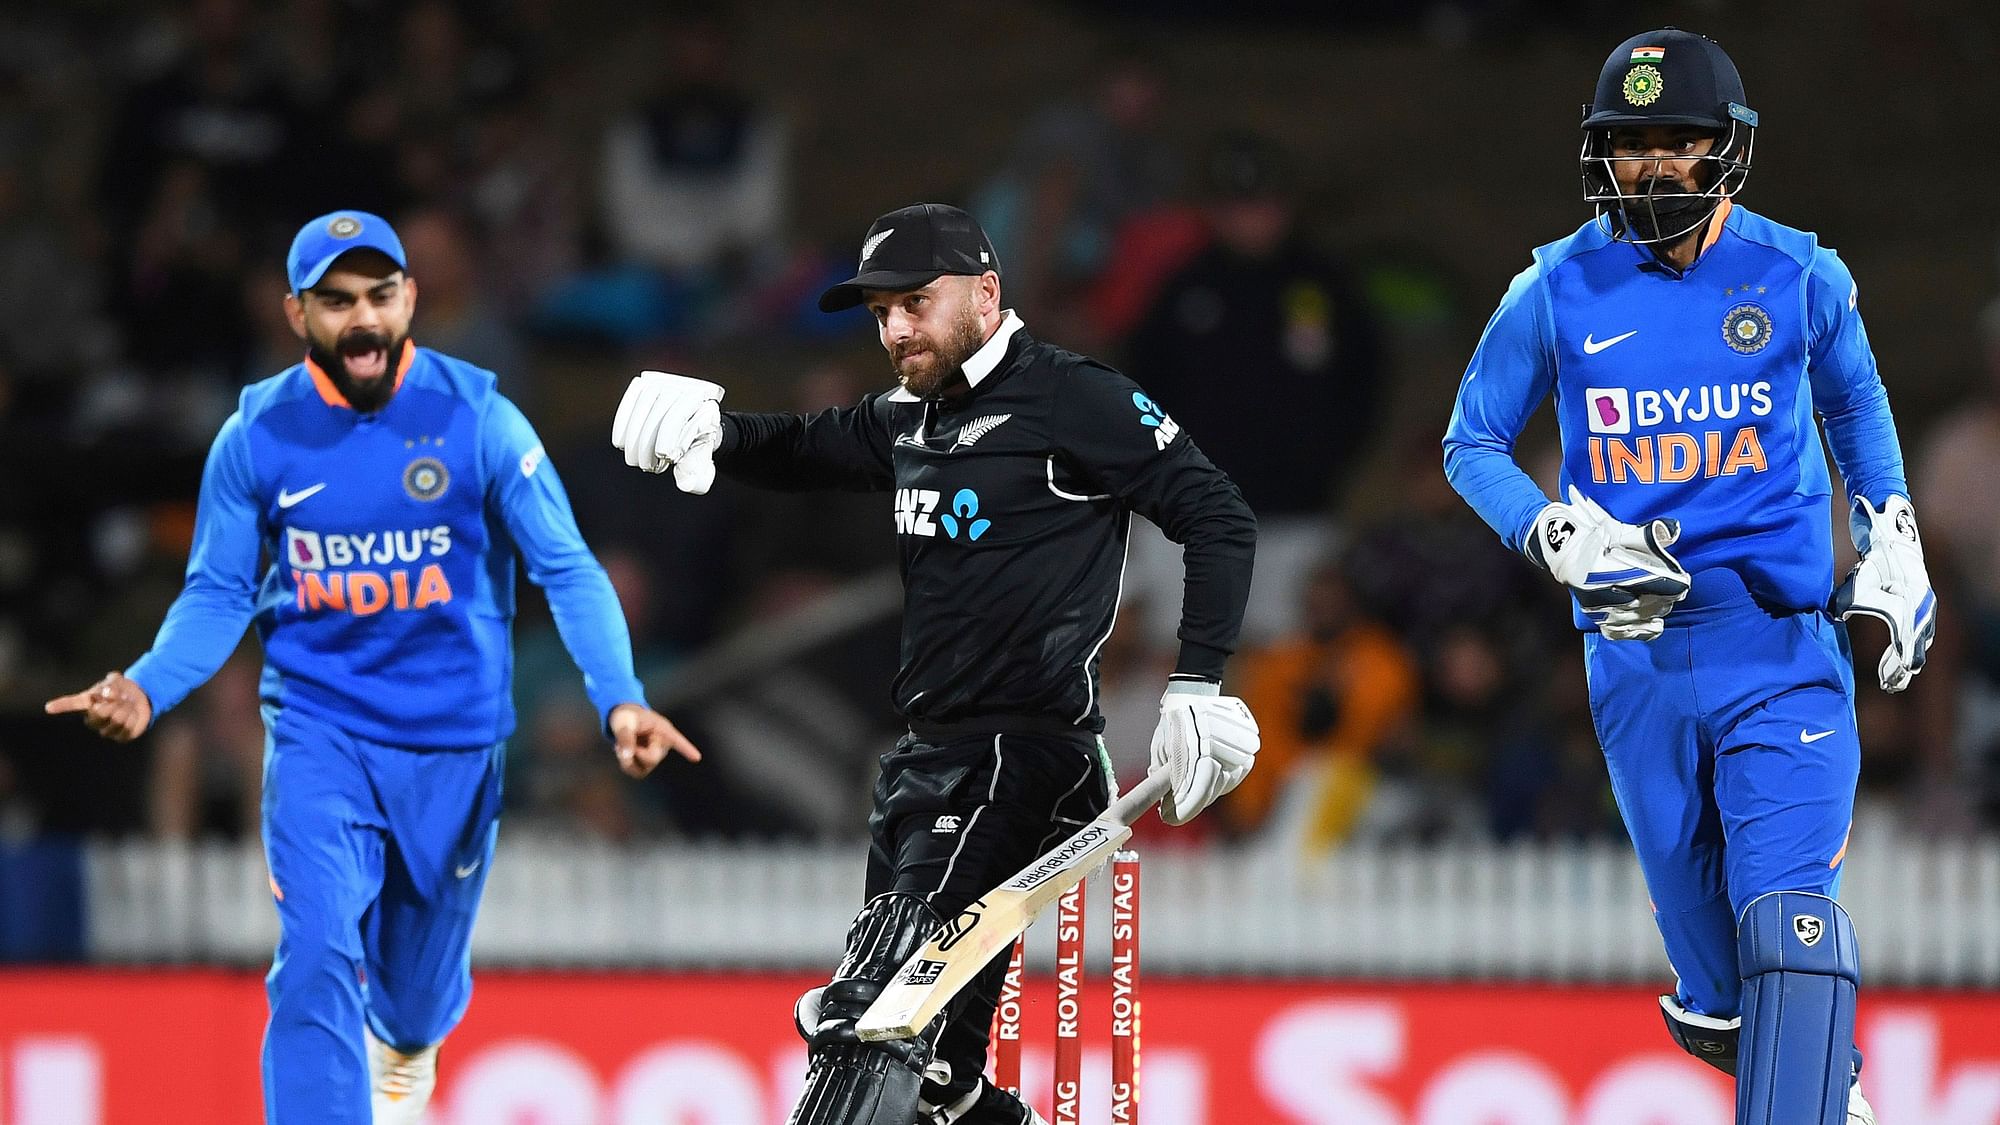 The Black Caps chased down their highest-ever total in ODI cricket at Seddon Park.